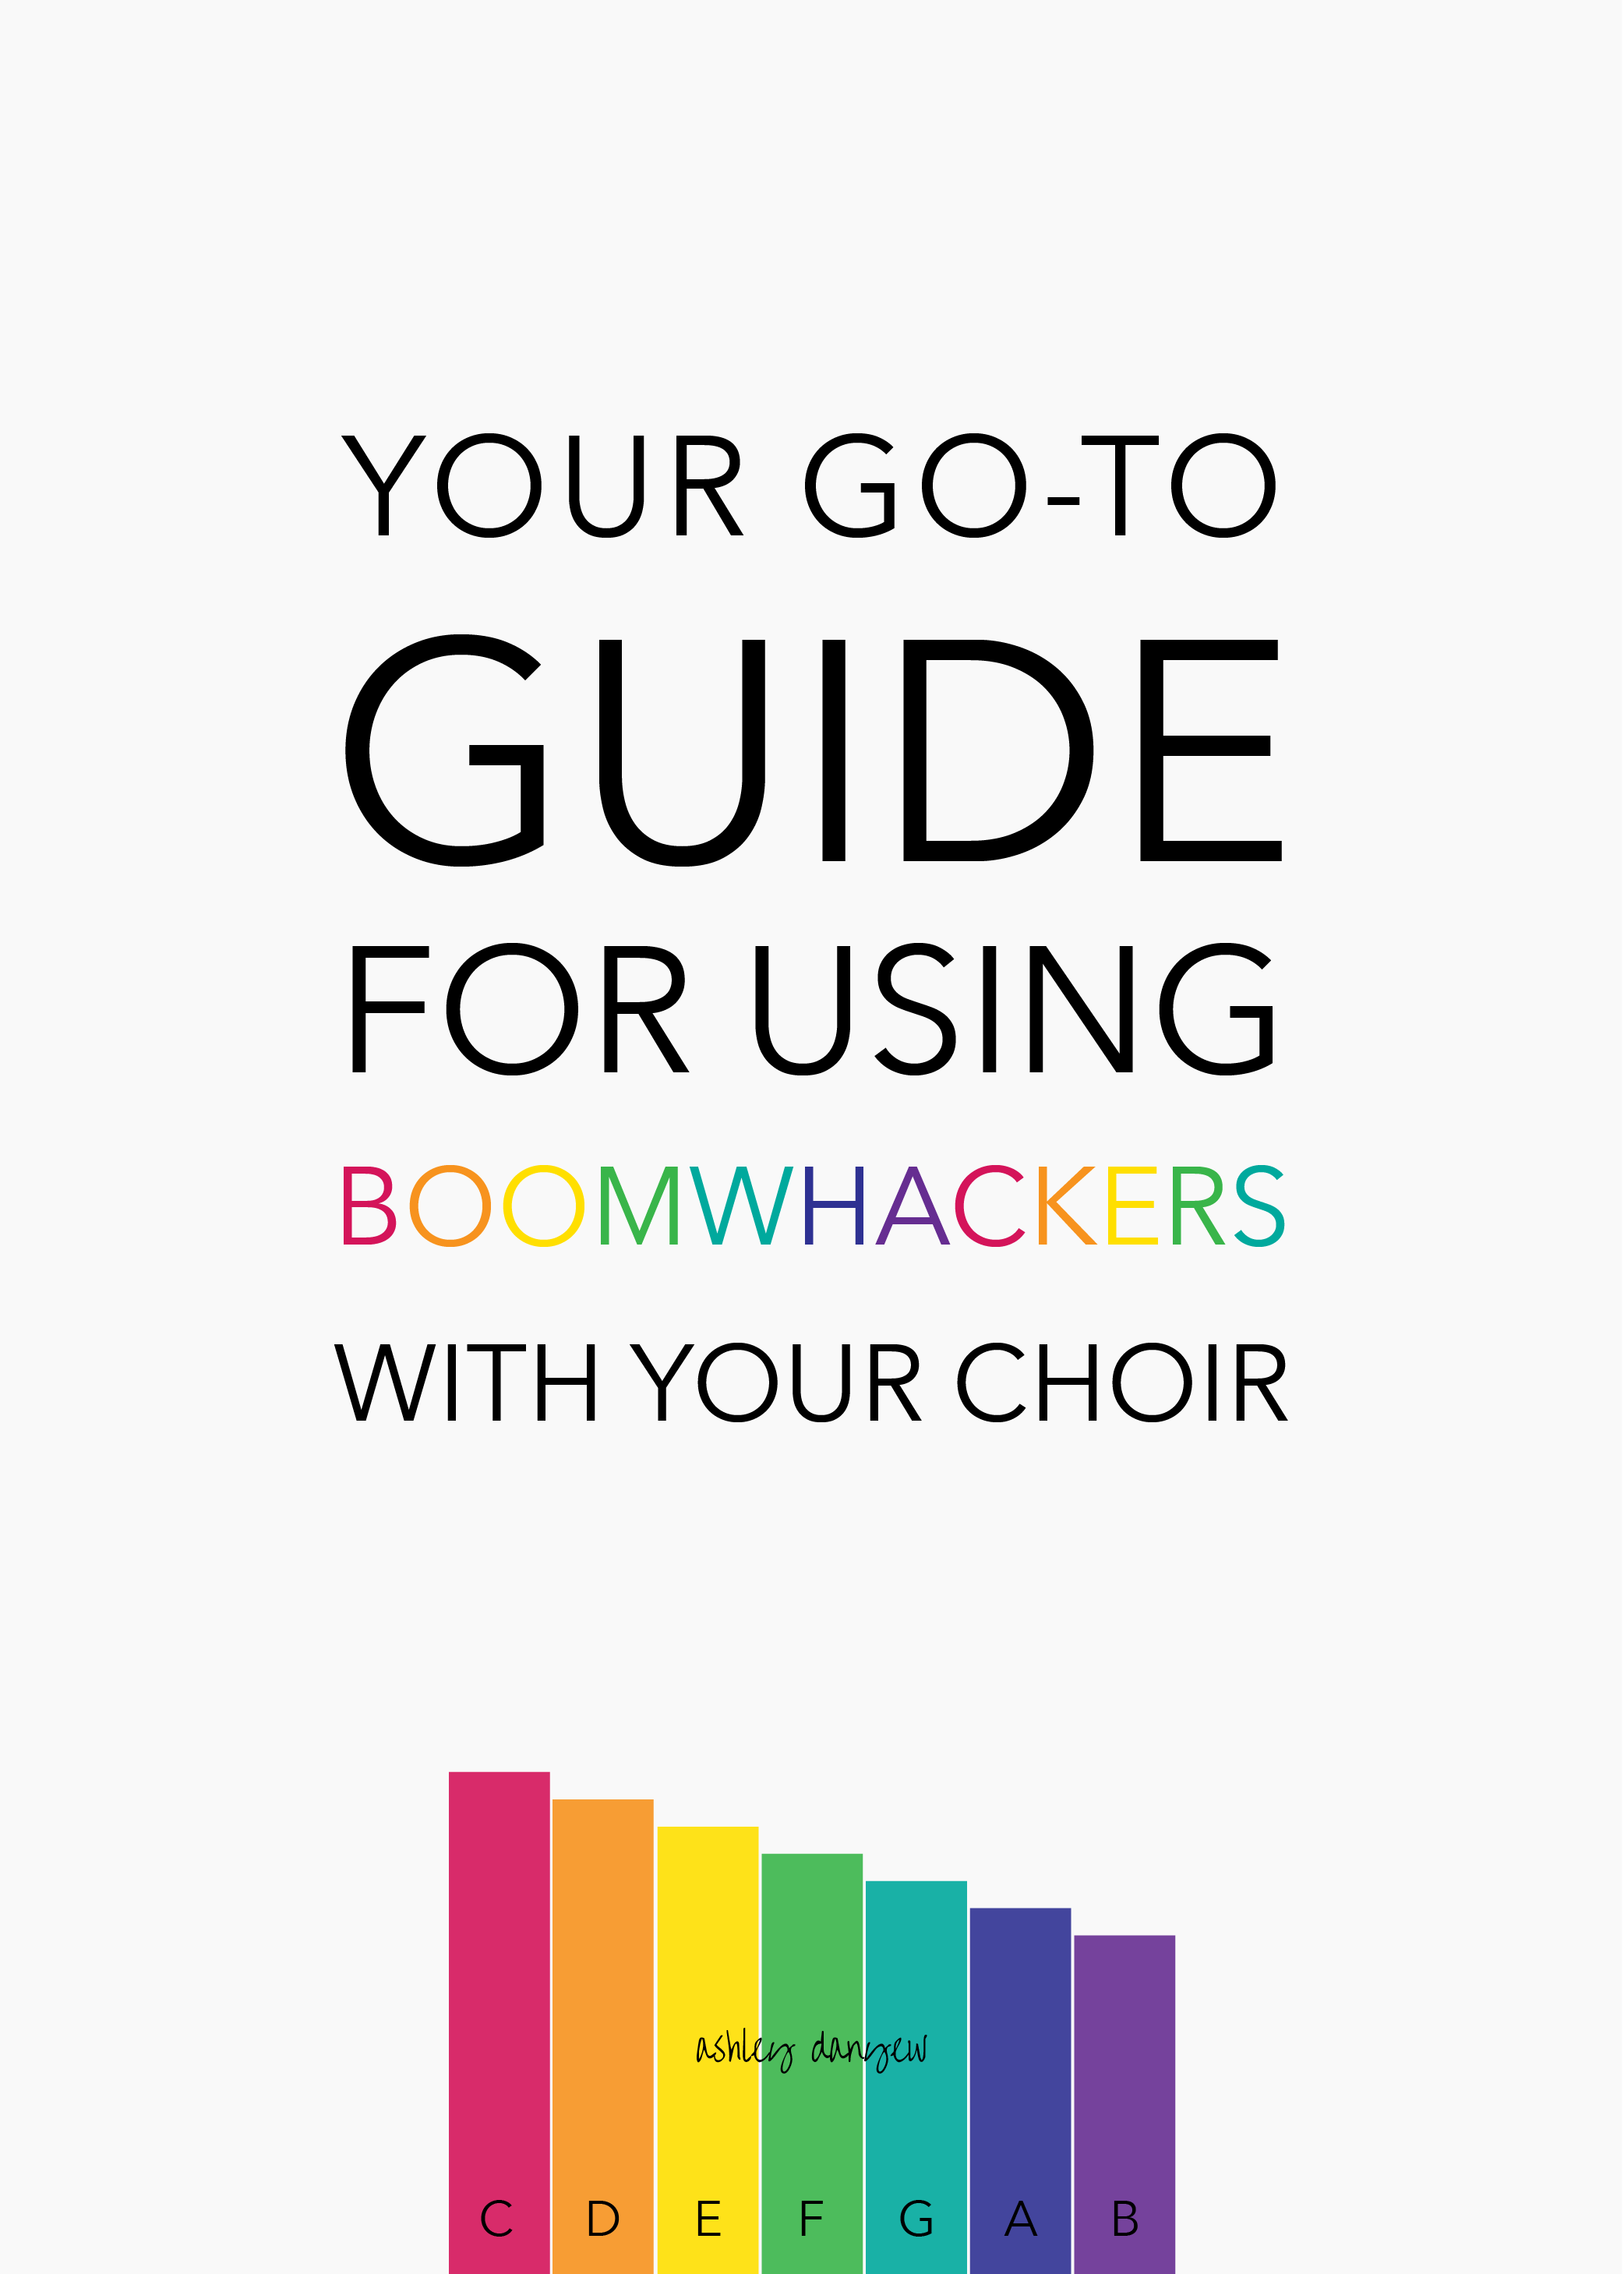 Your Go-To Guide for Using Boomwhackers With Your Choir-35.png